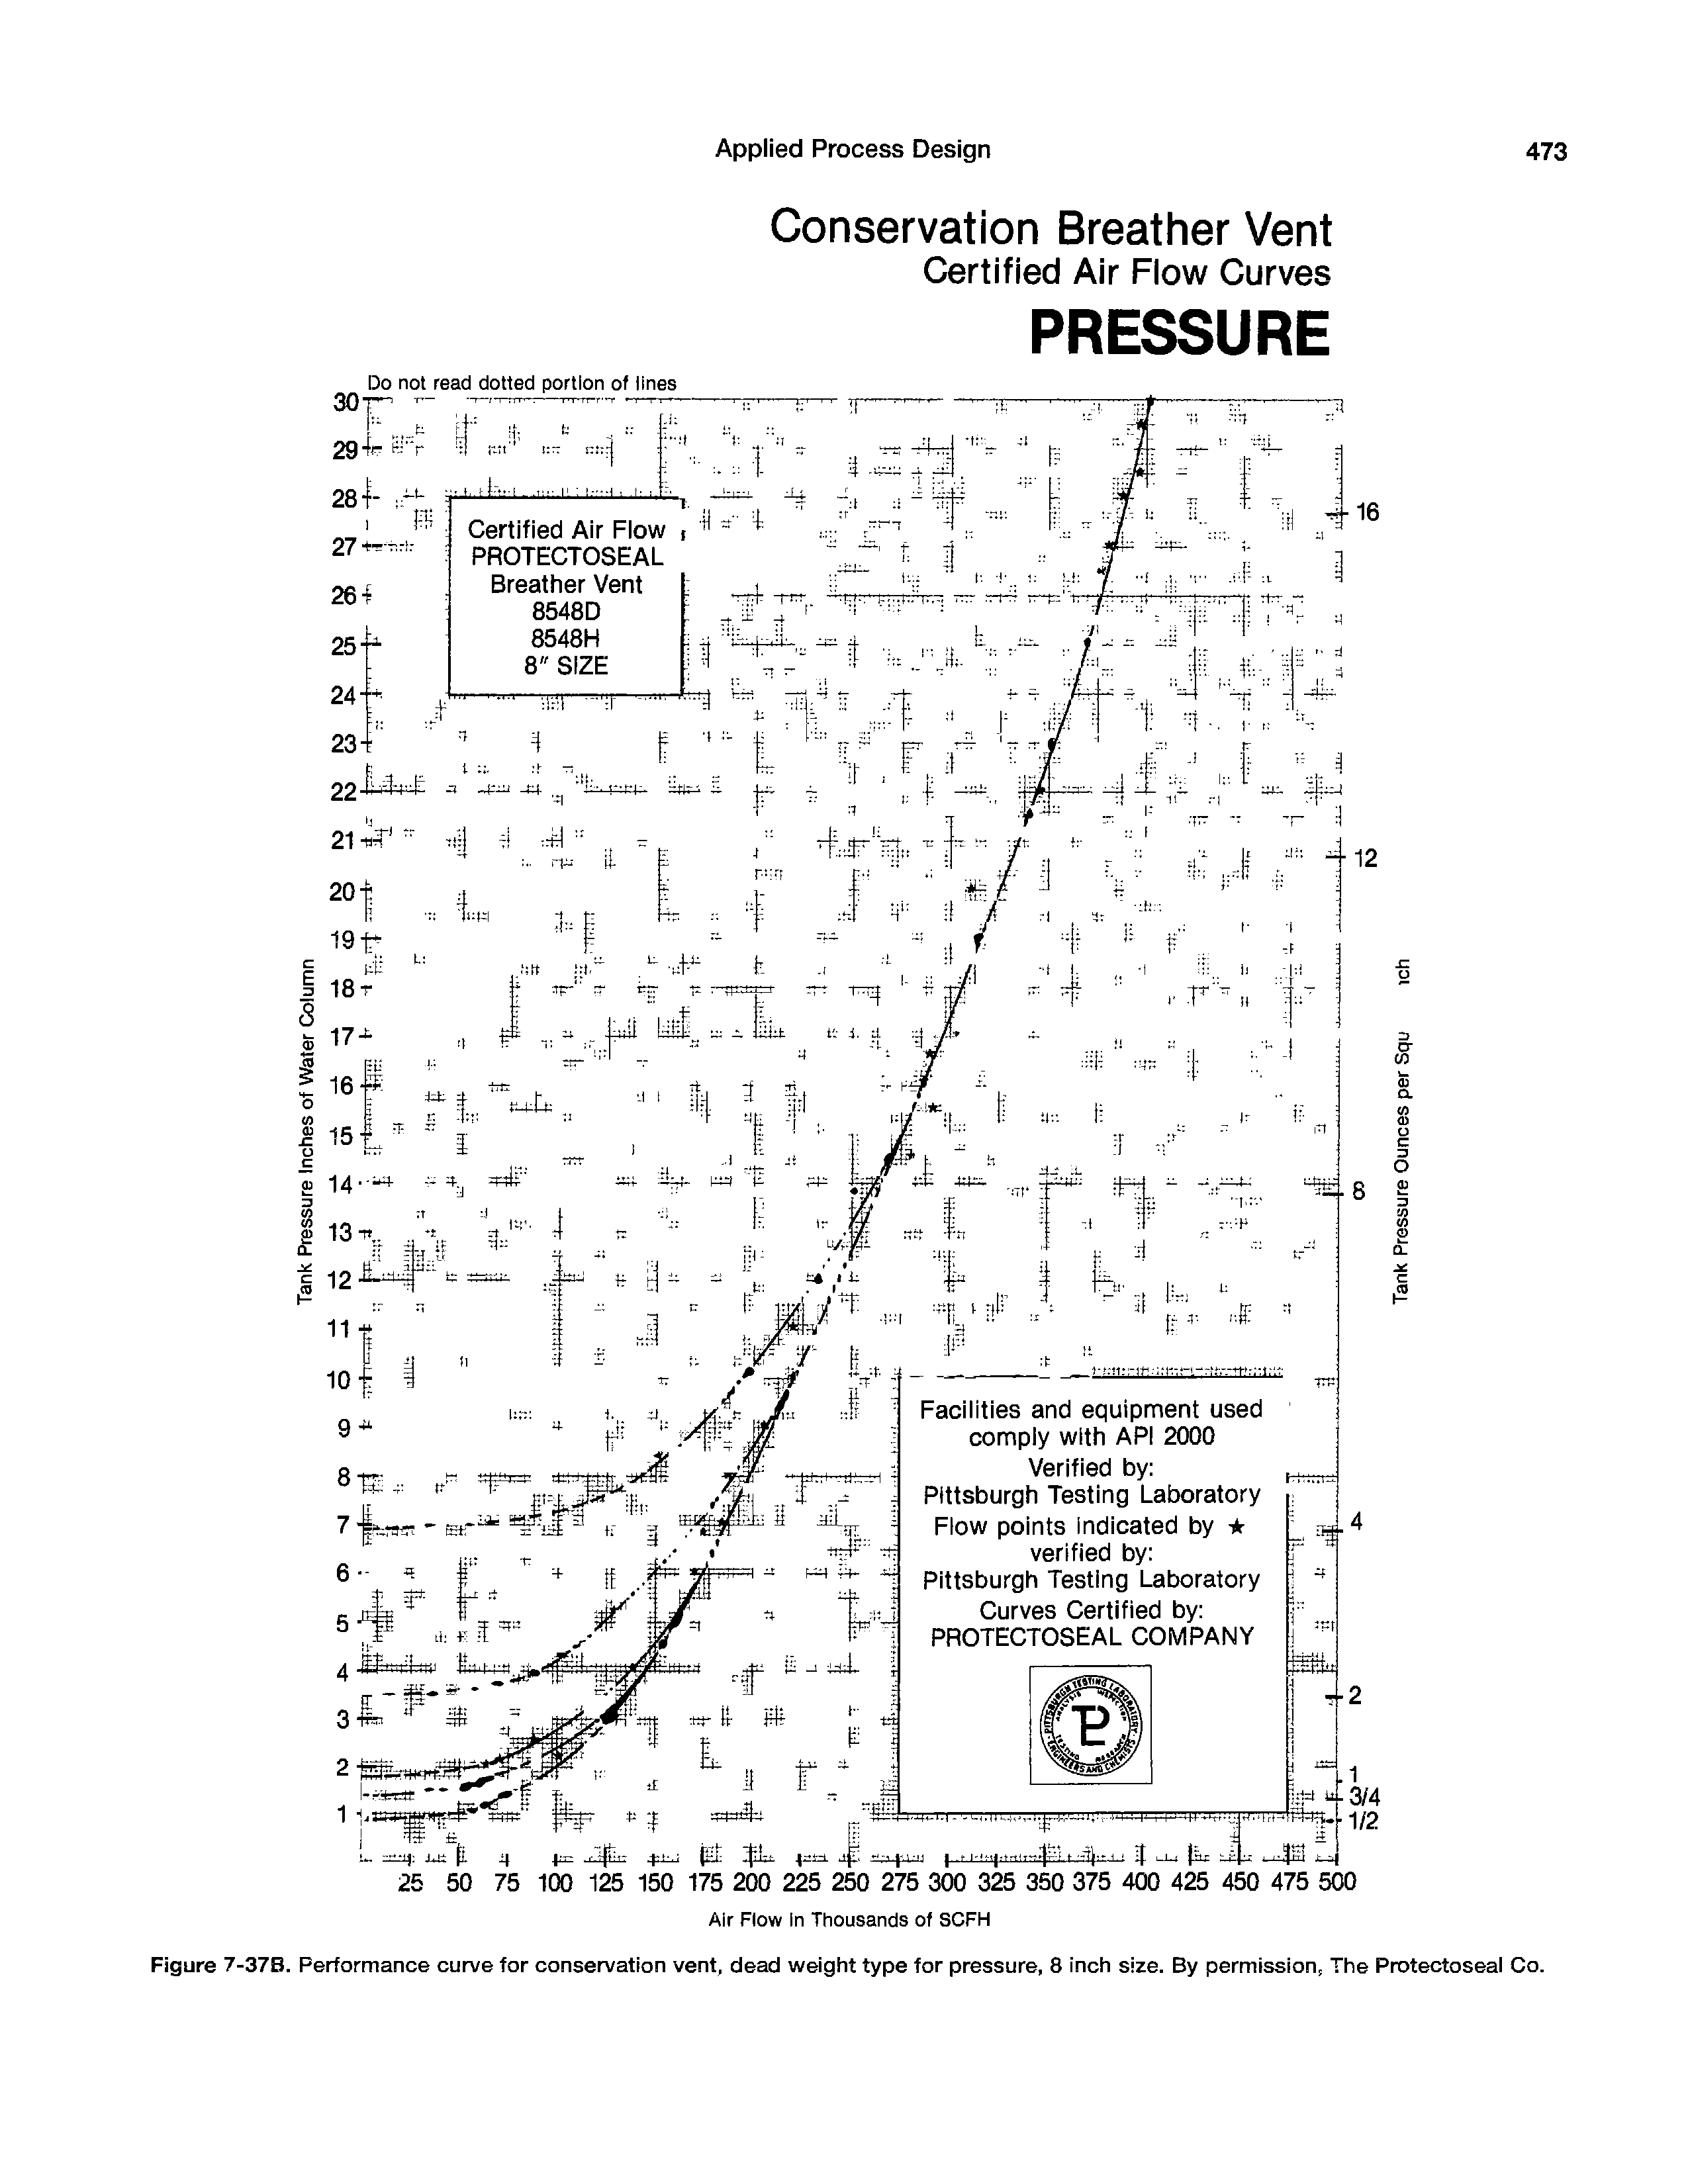 Figure 7-37B. Performance curve for conservation vent, dead weight type for pressure, 8 inch size. By permission, The Protectoseal Co.